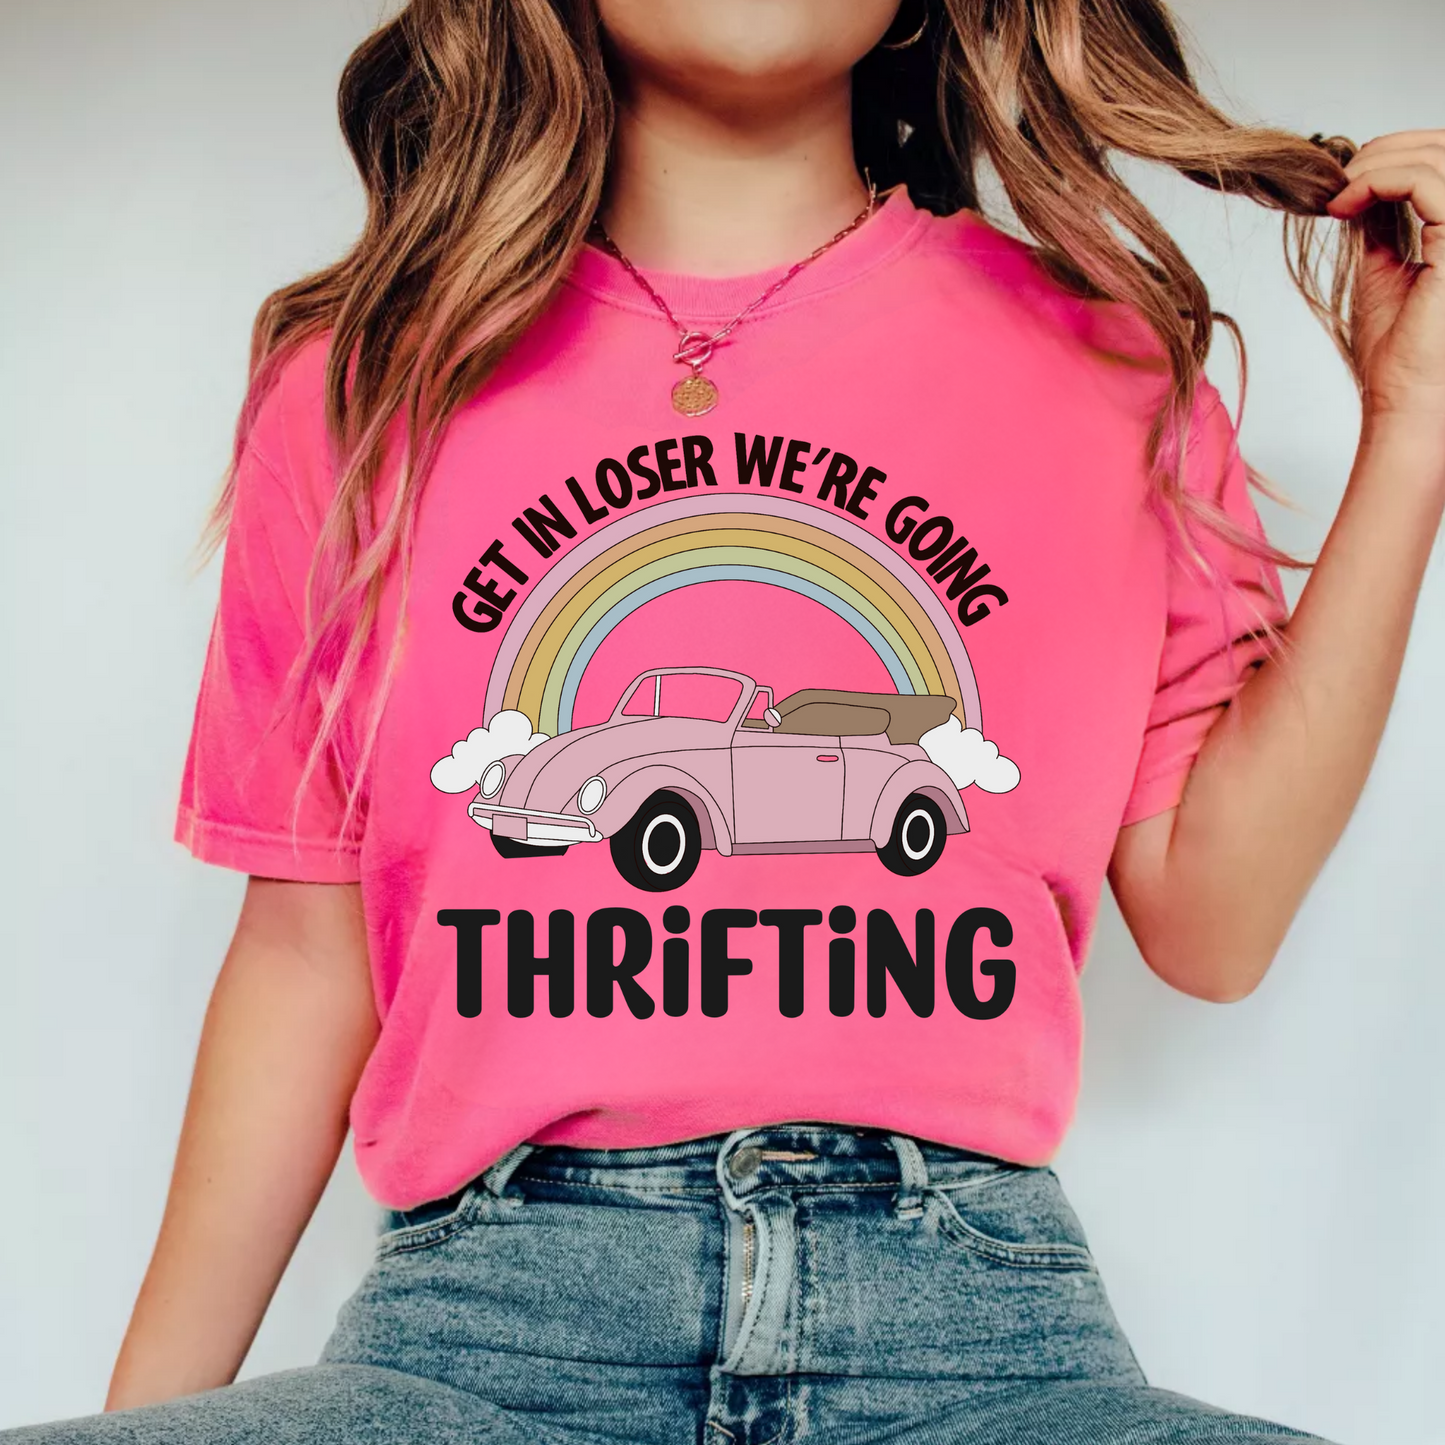 (shirt not included) Get in Loser We're going Thrifting - Clear Film Transfer